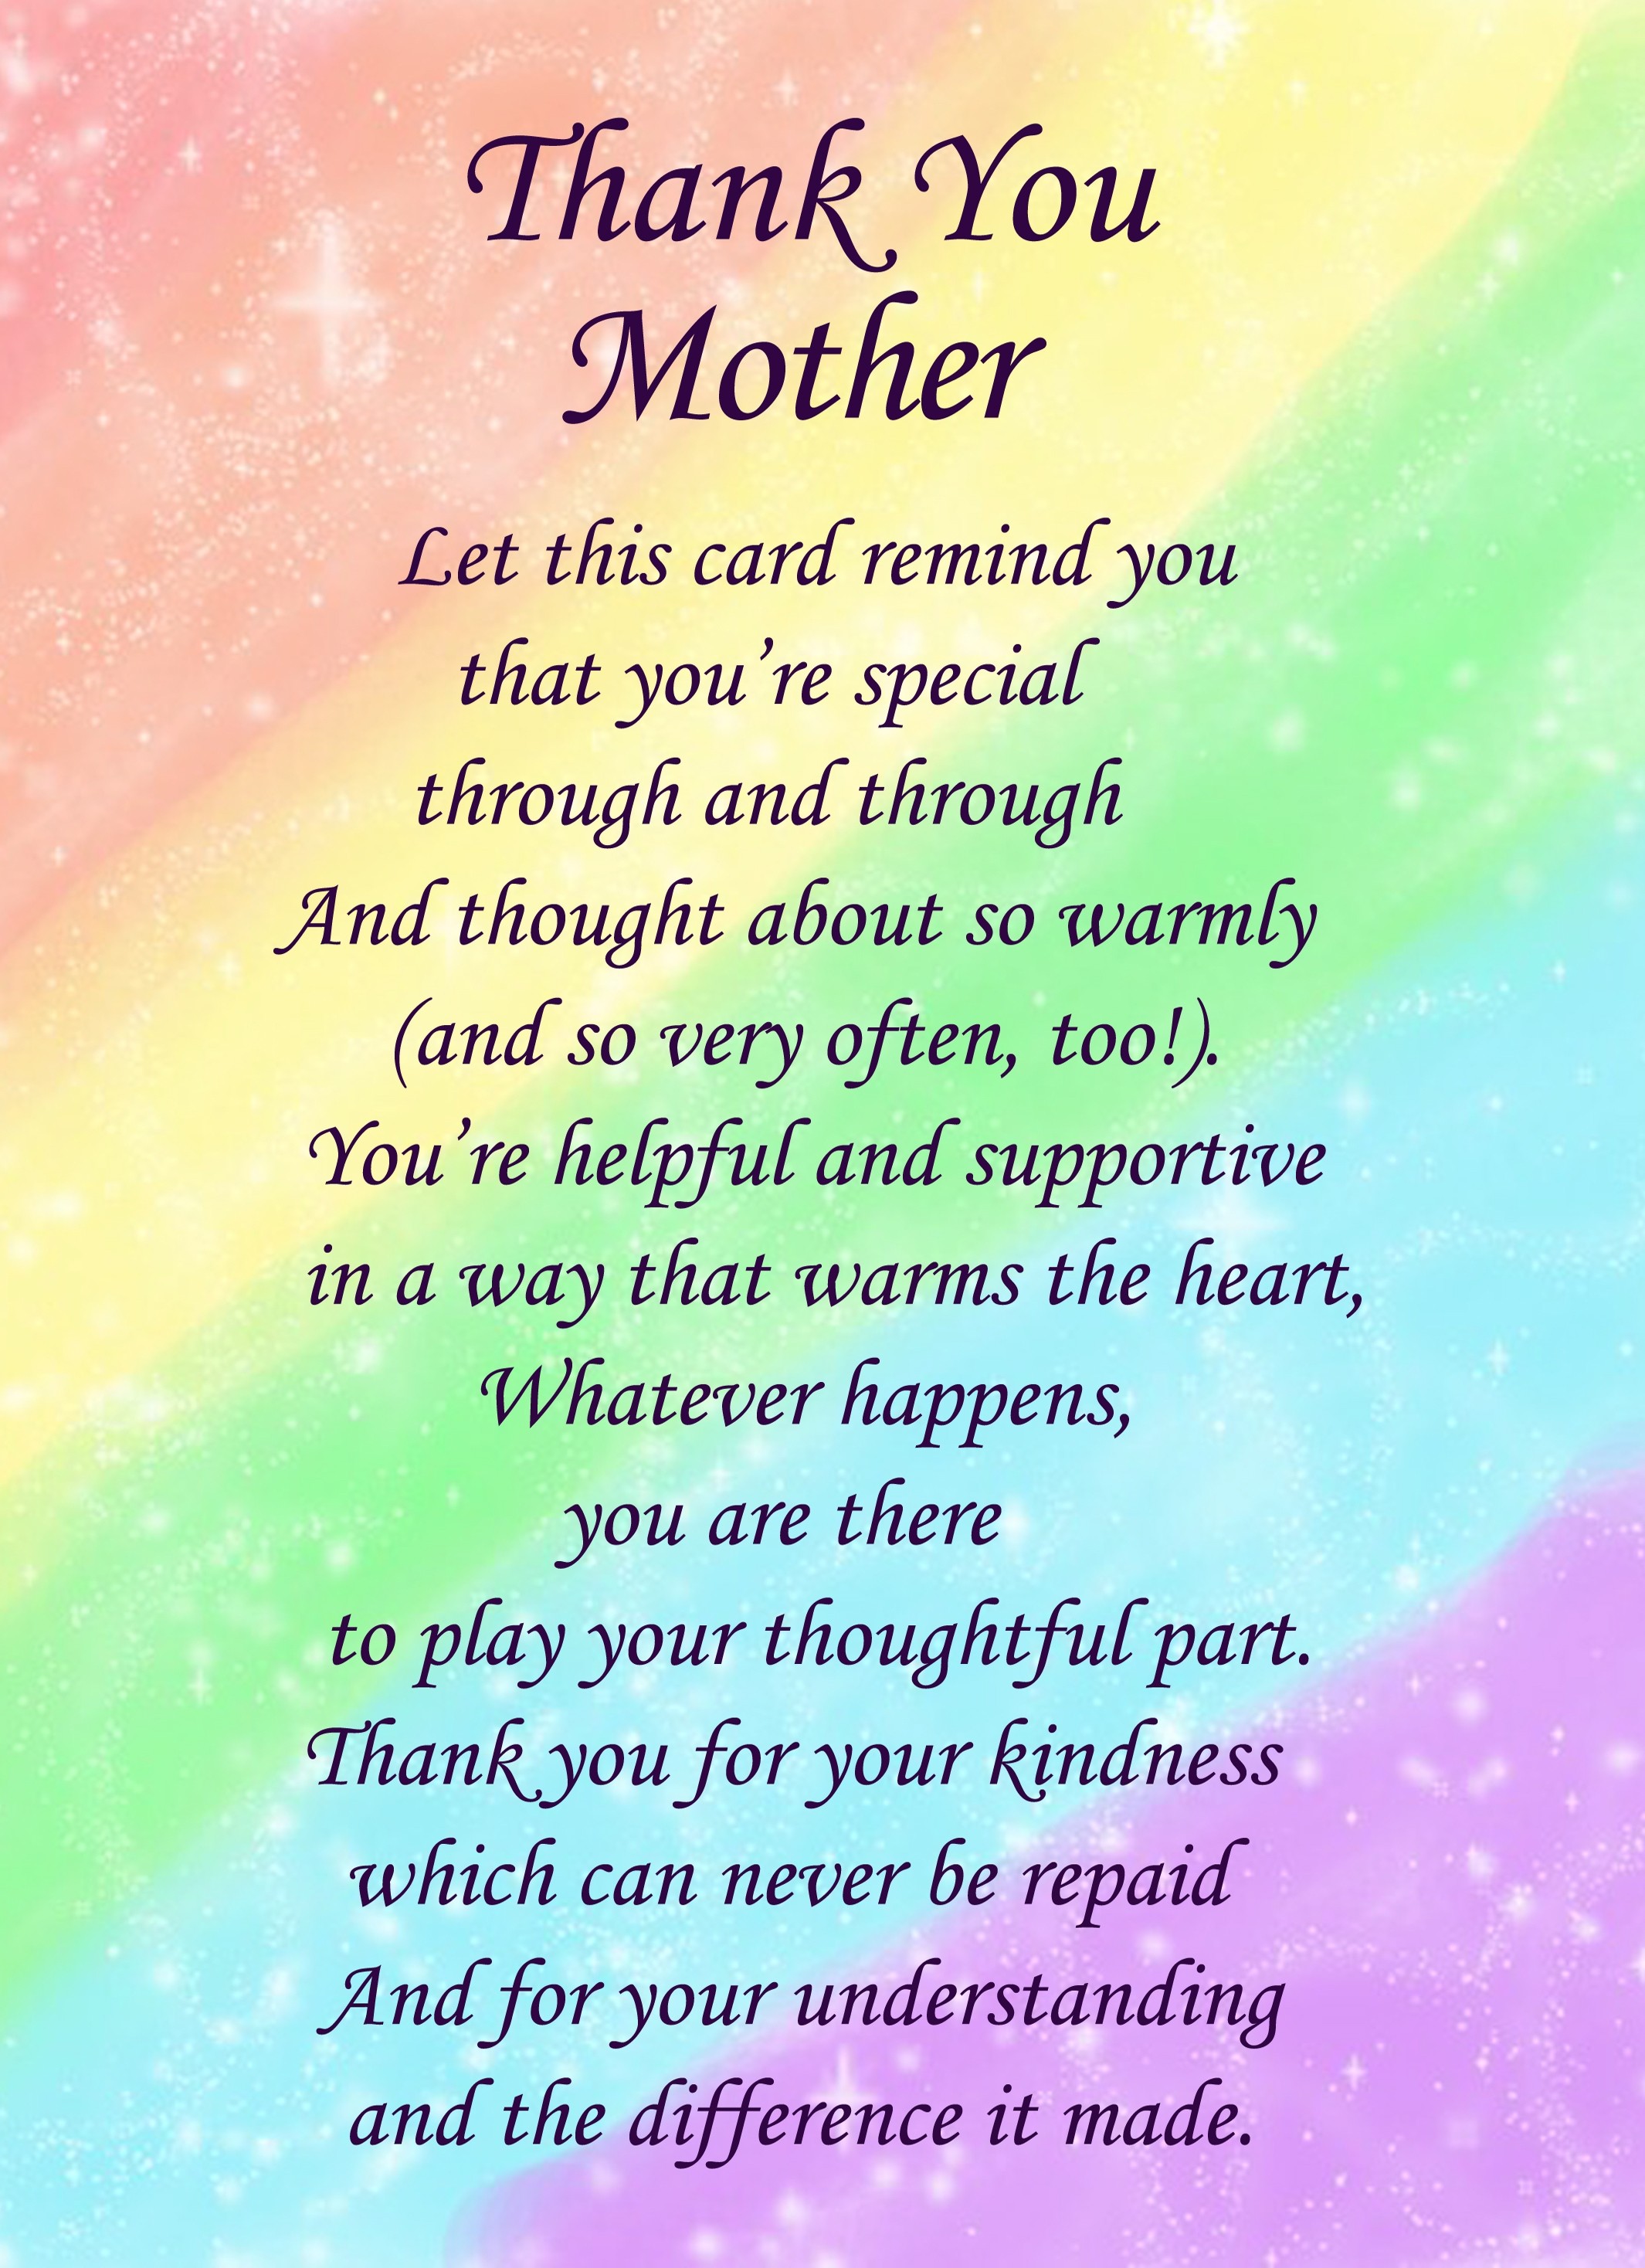 Thank You 'Mother' Poem Verse Greeting Card